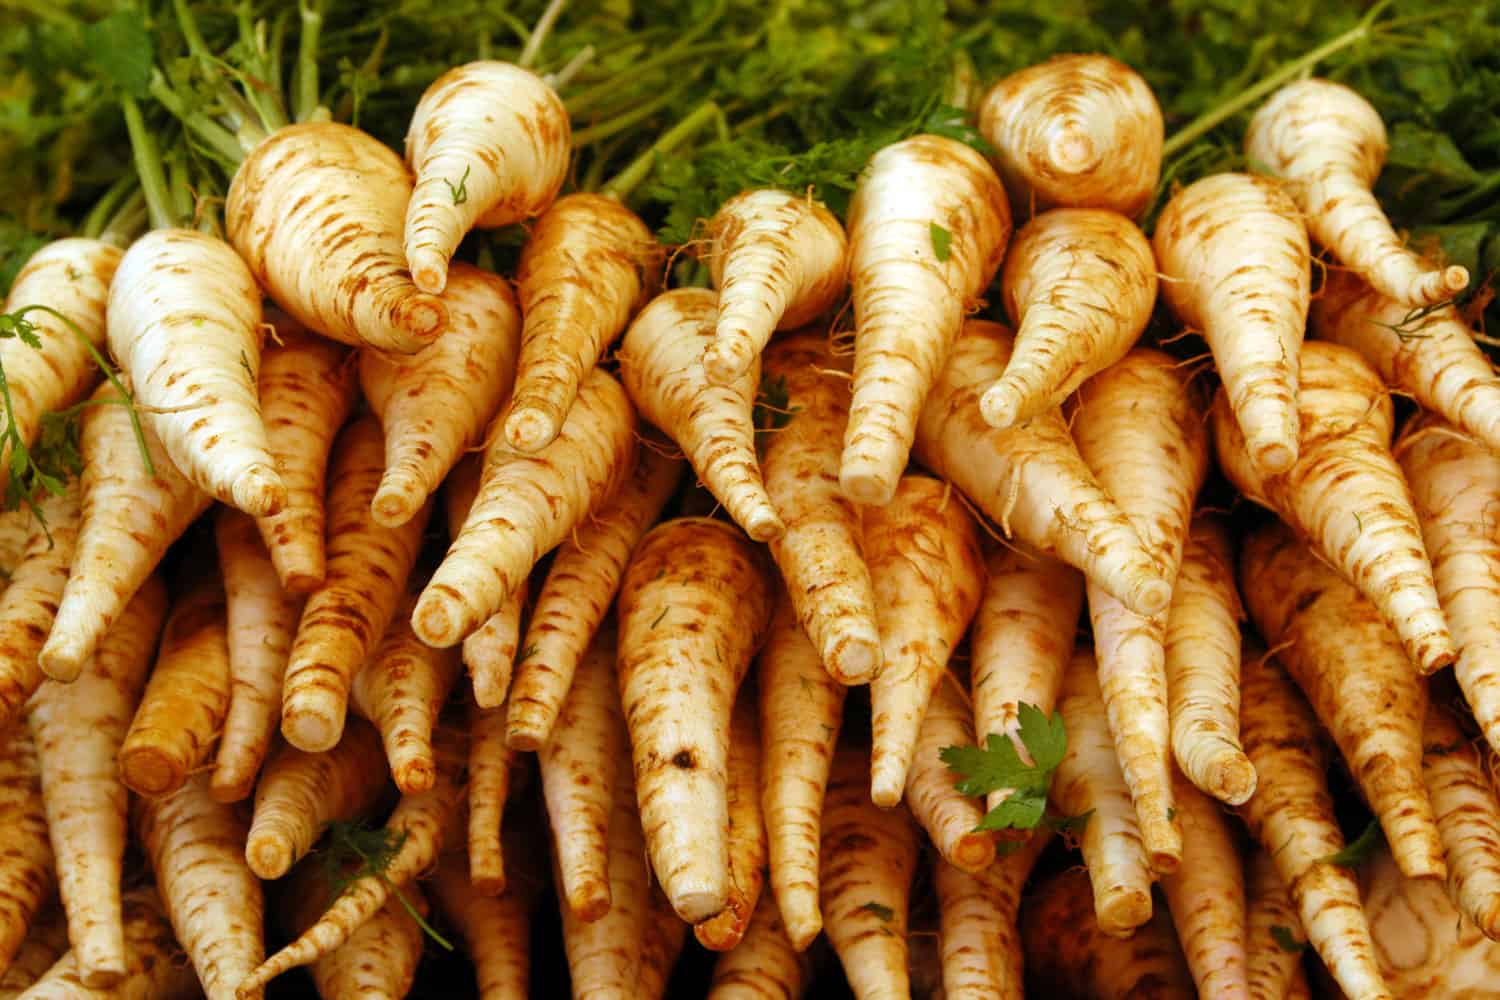 A stockpile of harvested parsnips in the garden